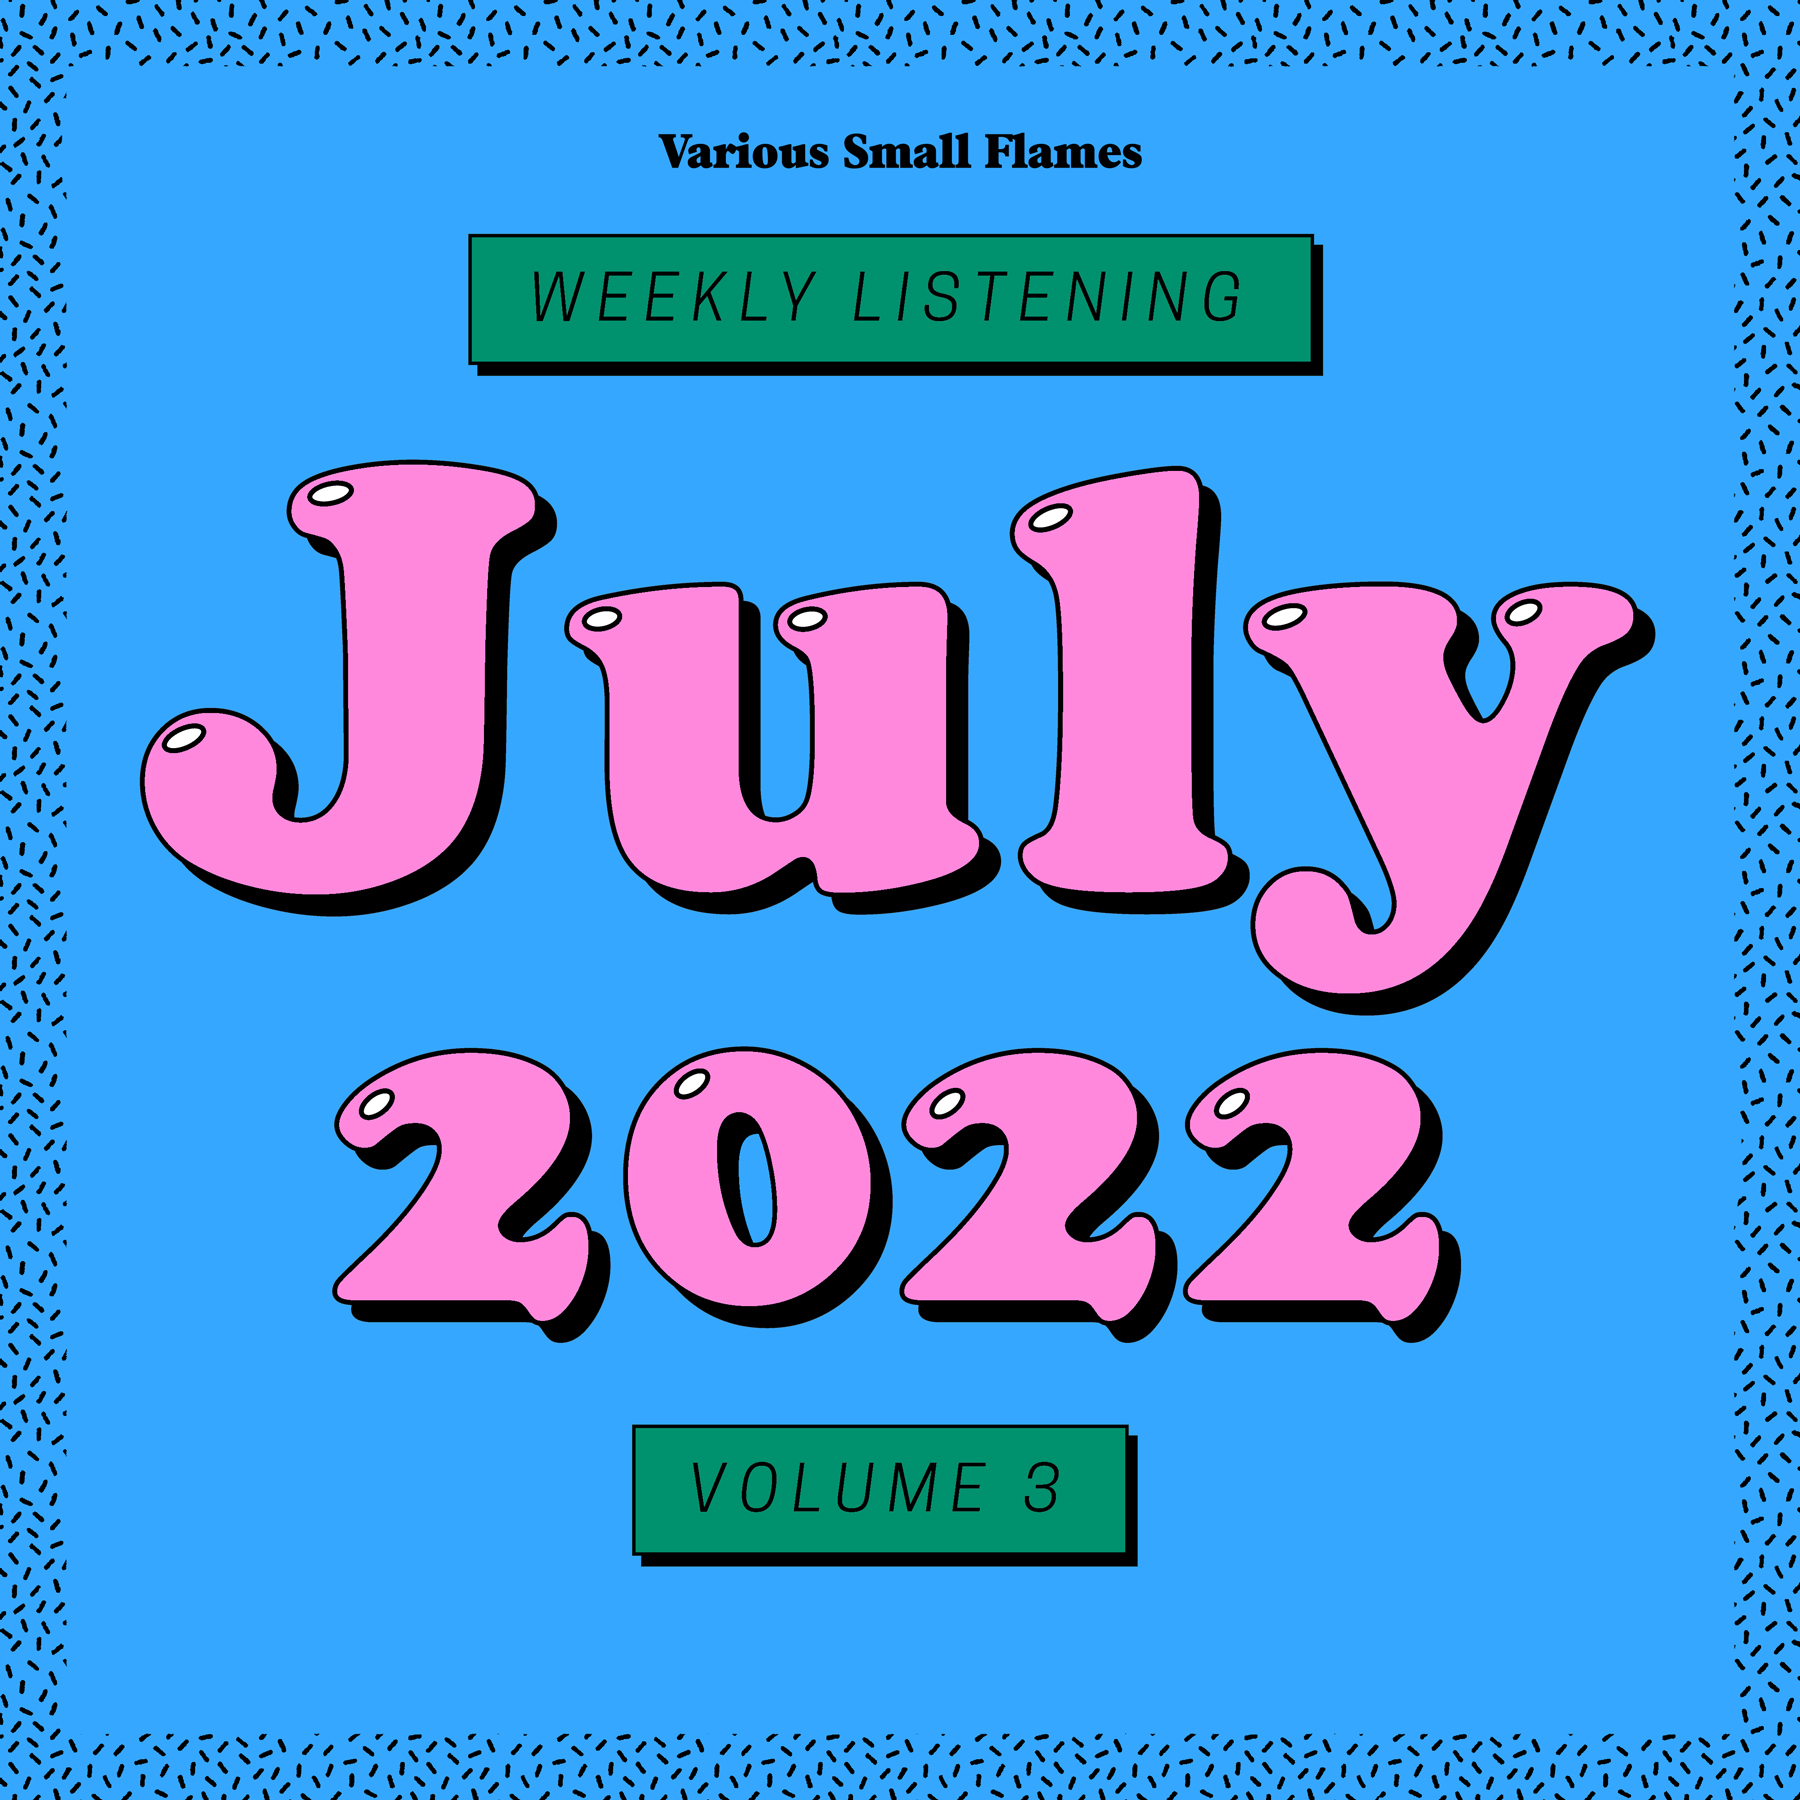 weekly listening july 2022 volume 3 various small flames